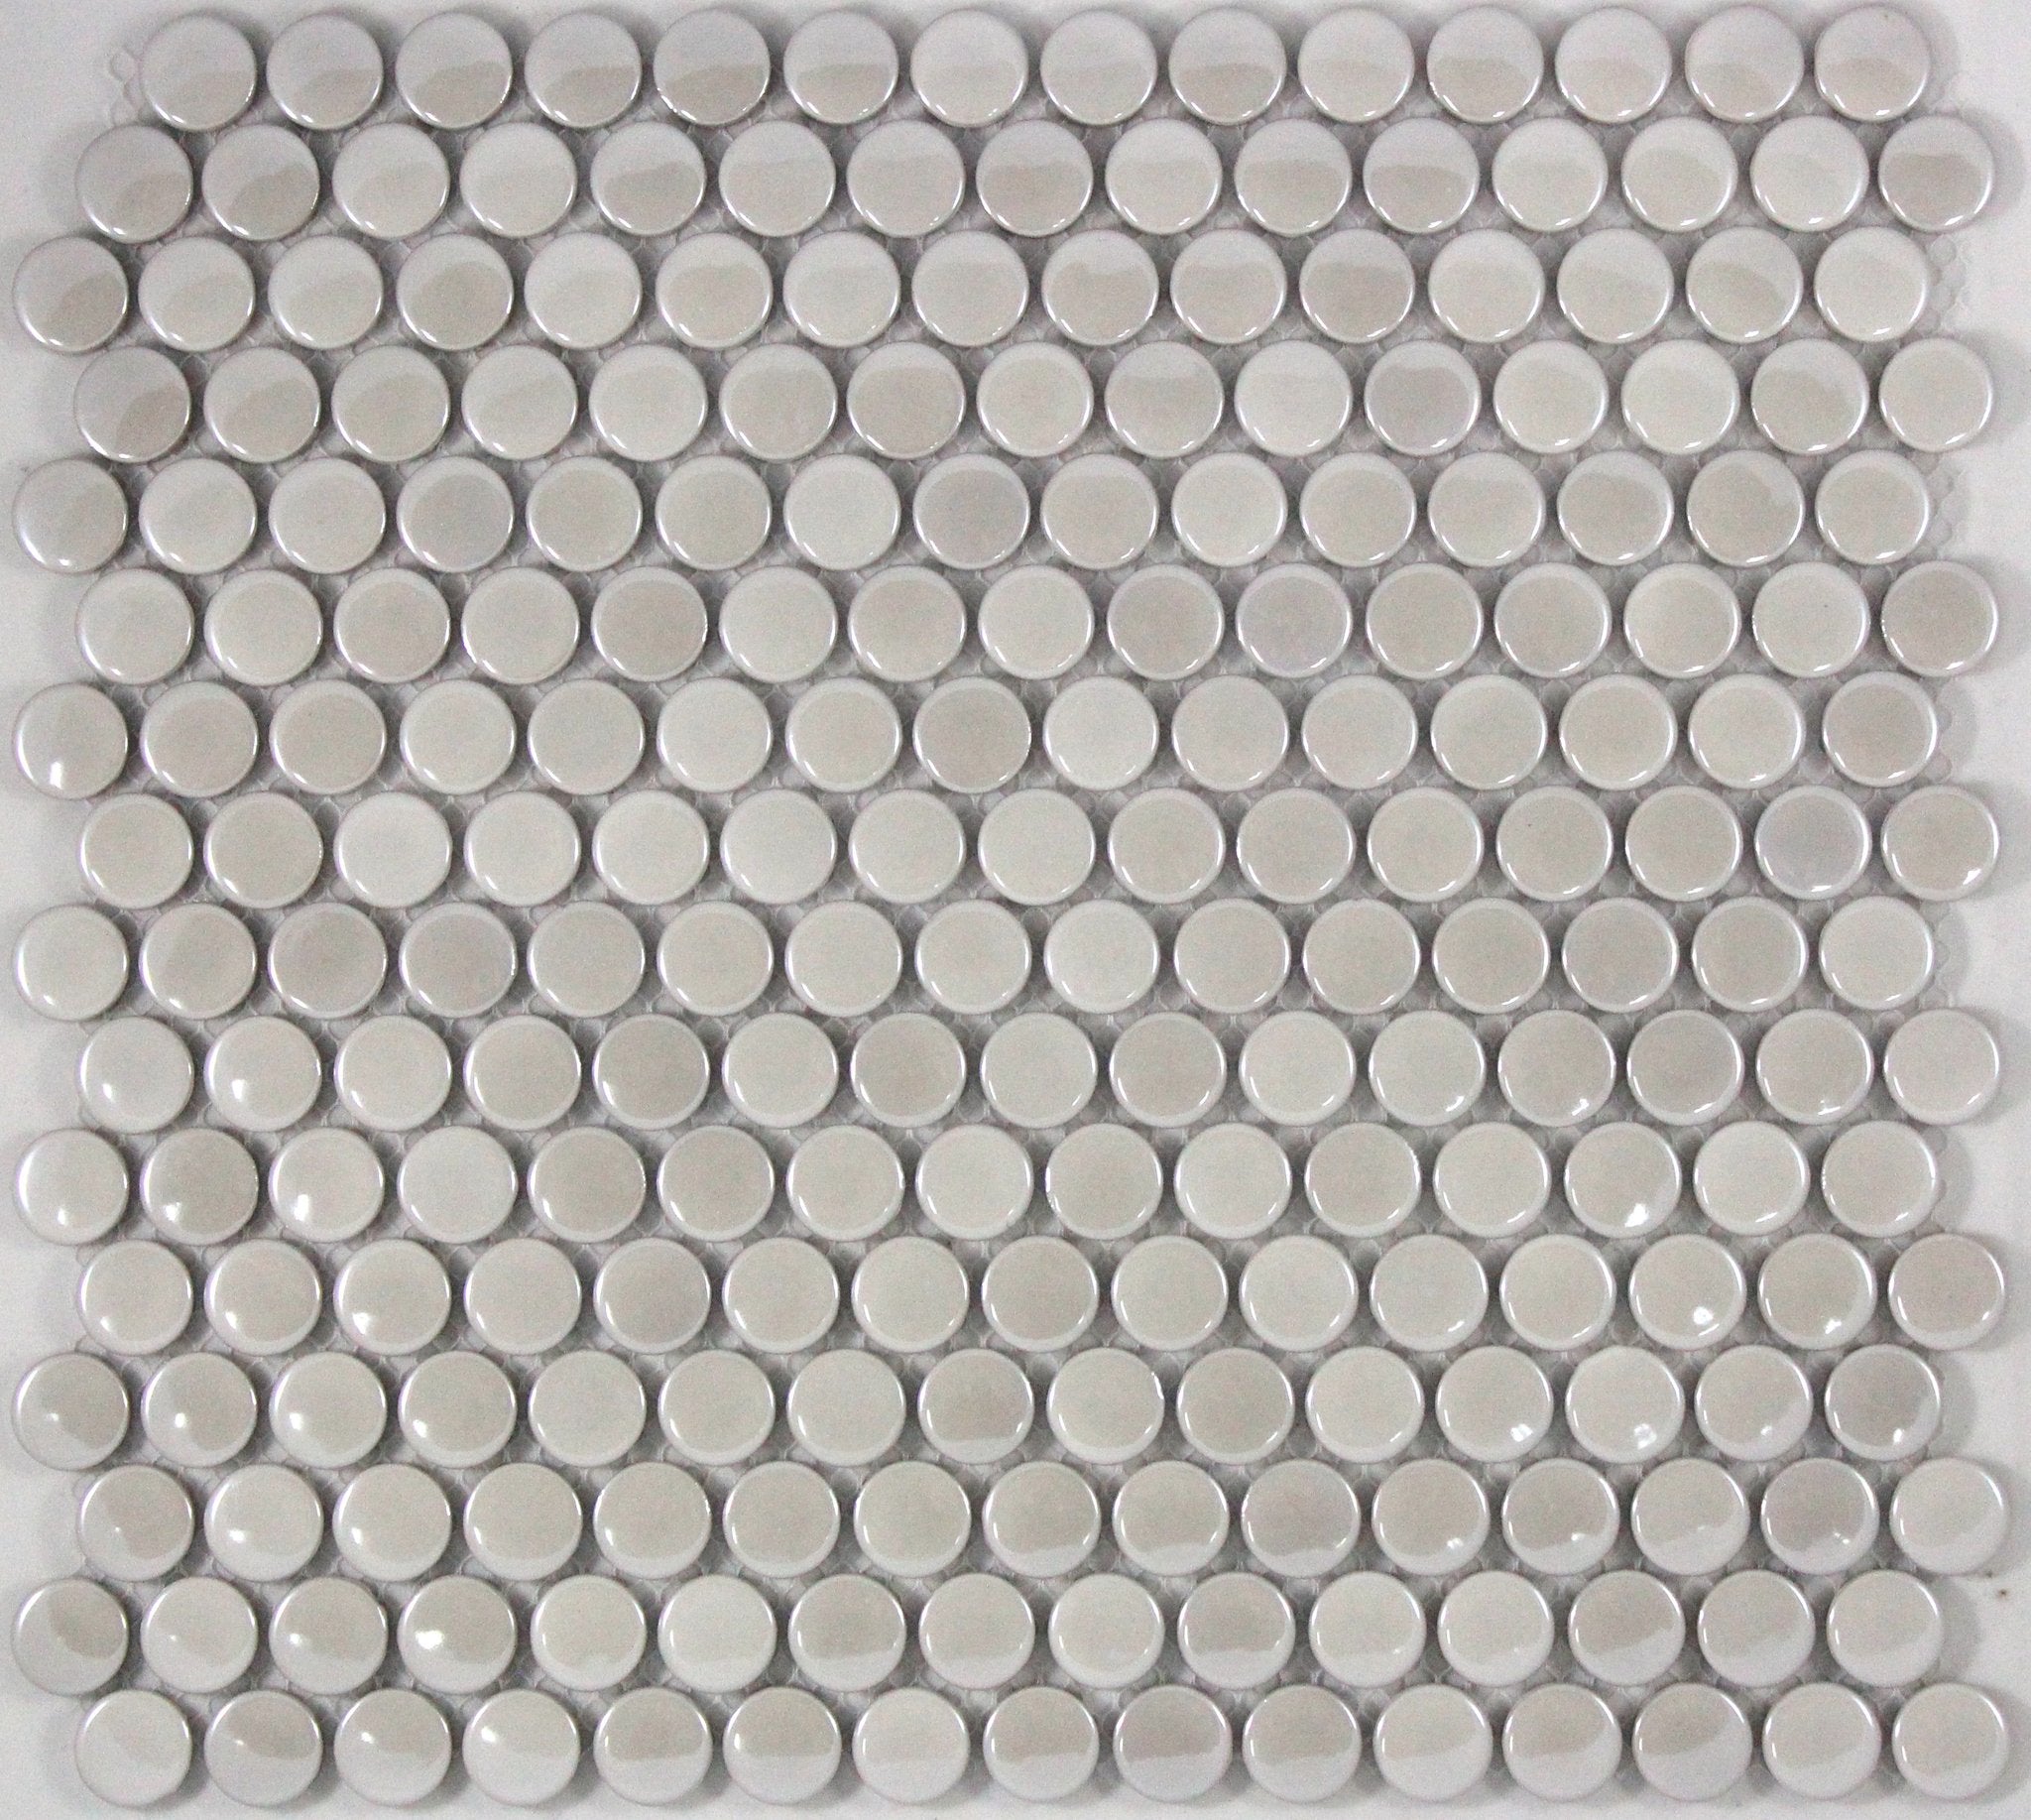 Metallic Mother Of Pearl Penny Round Mosaic Tile 19mm